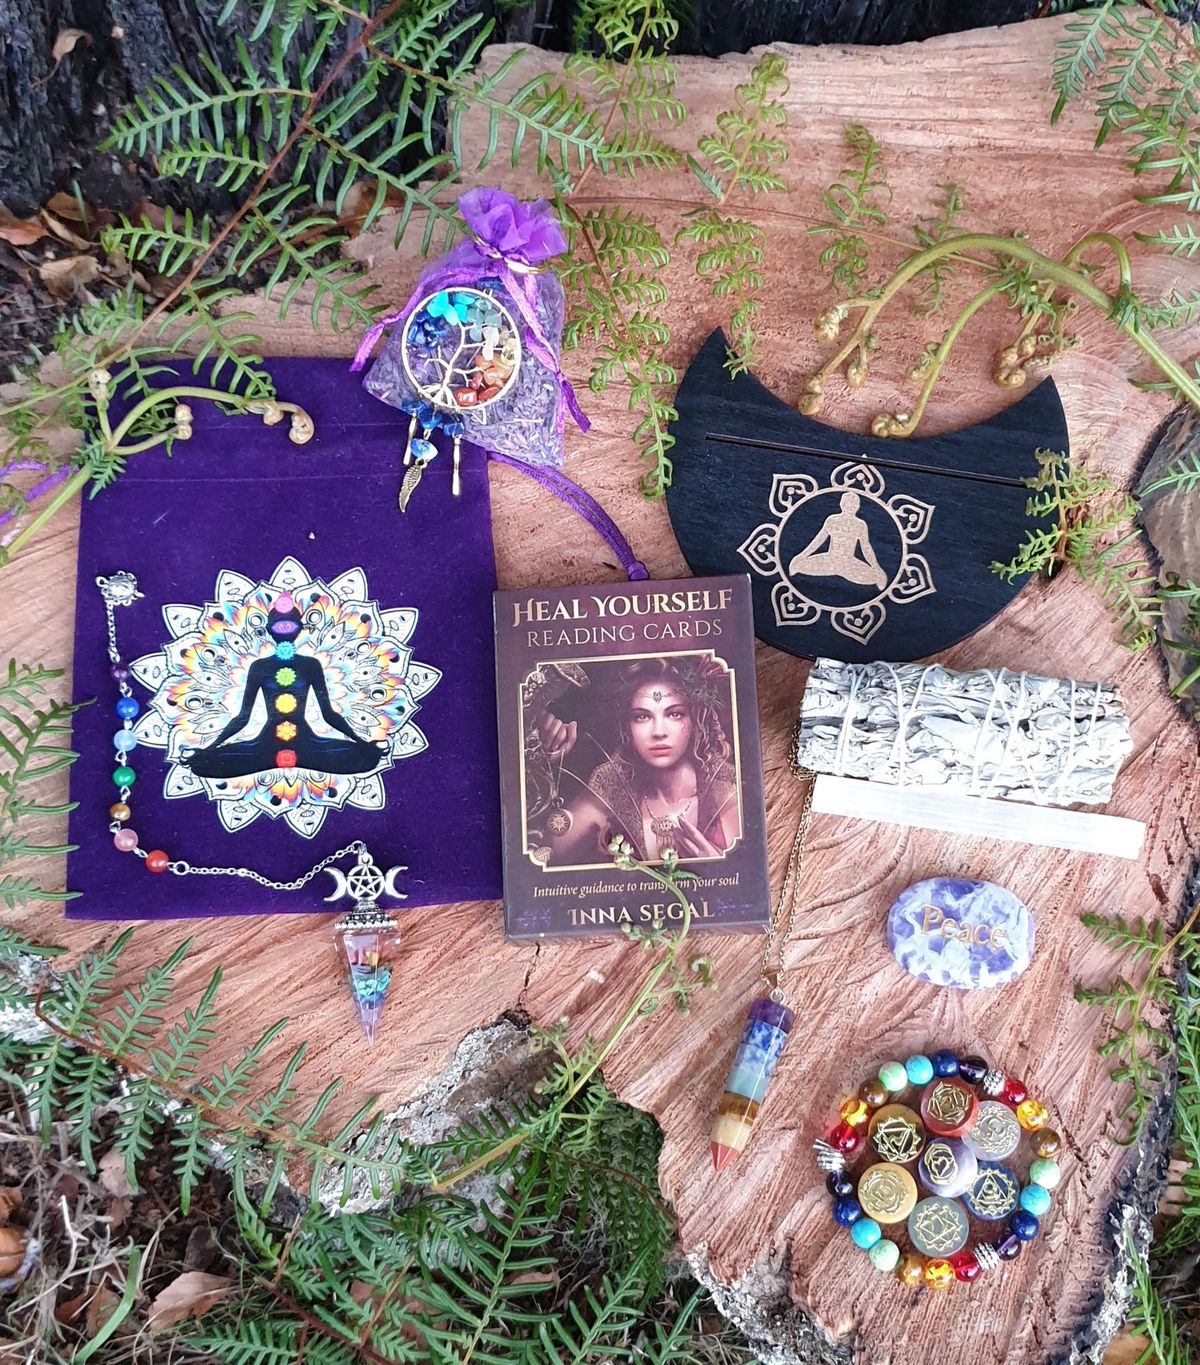 Enchanted Wildflower Feilding Craft market event and win Chakra Giftset Prize